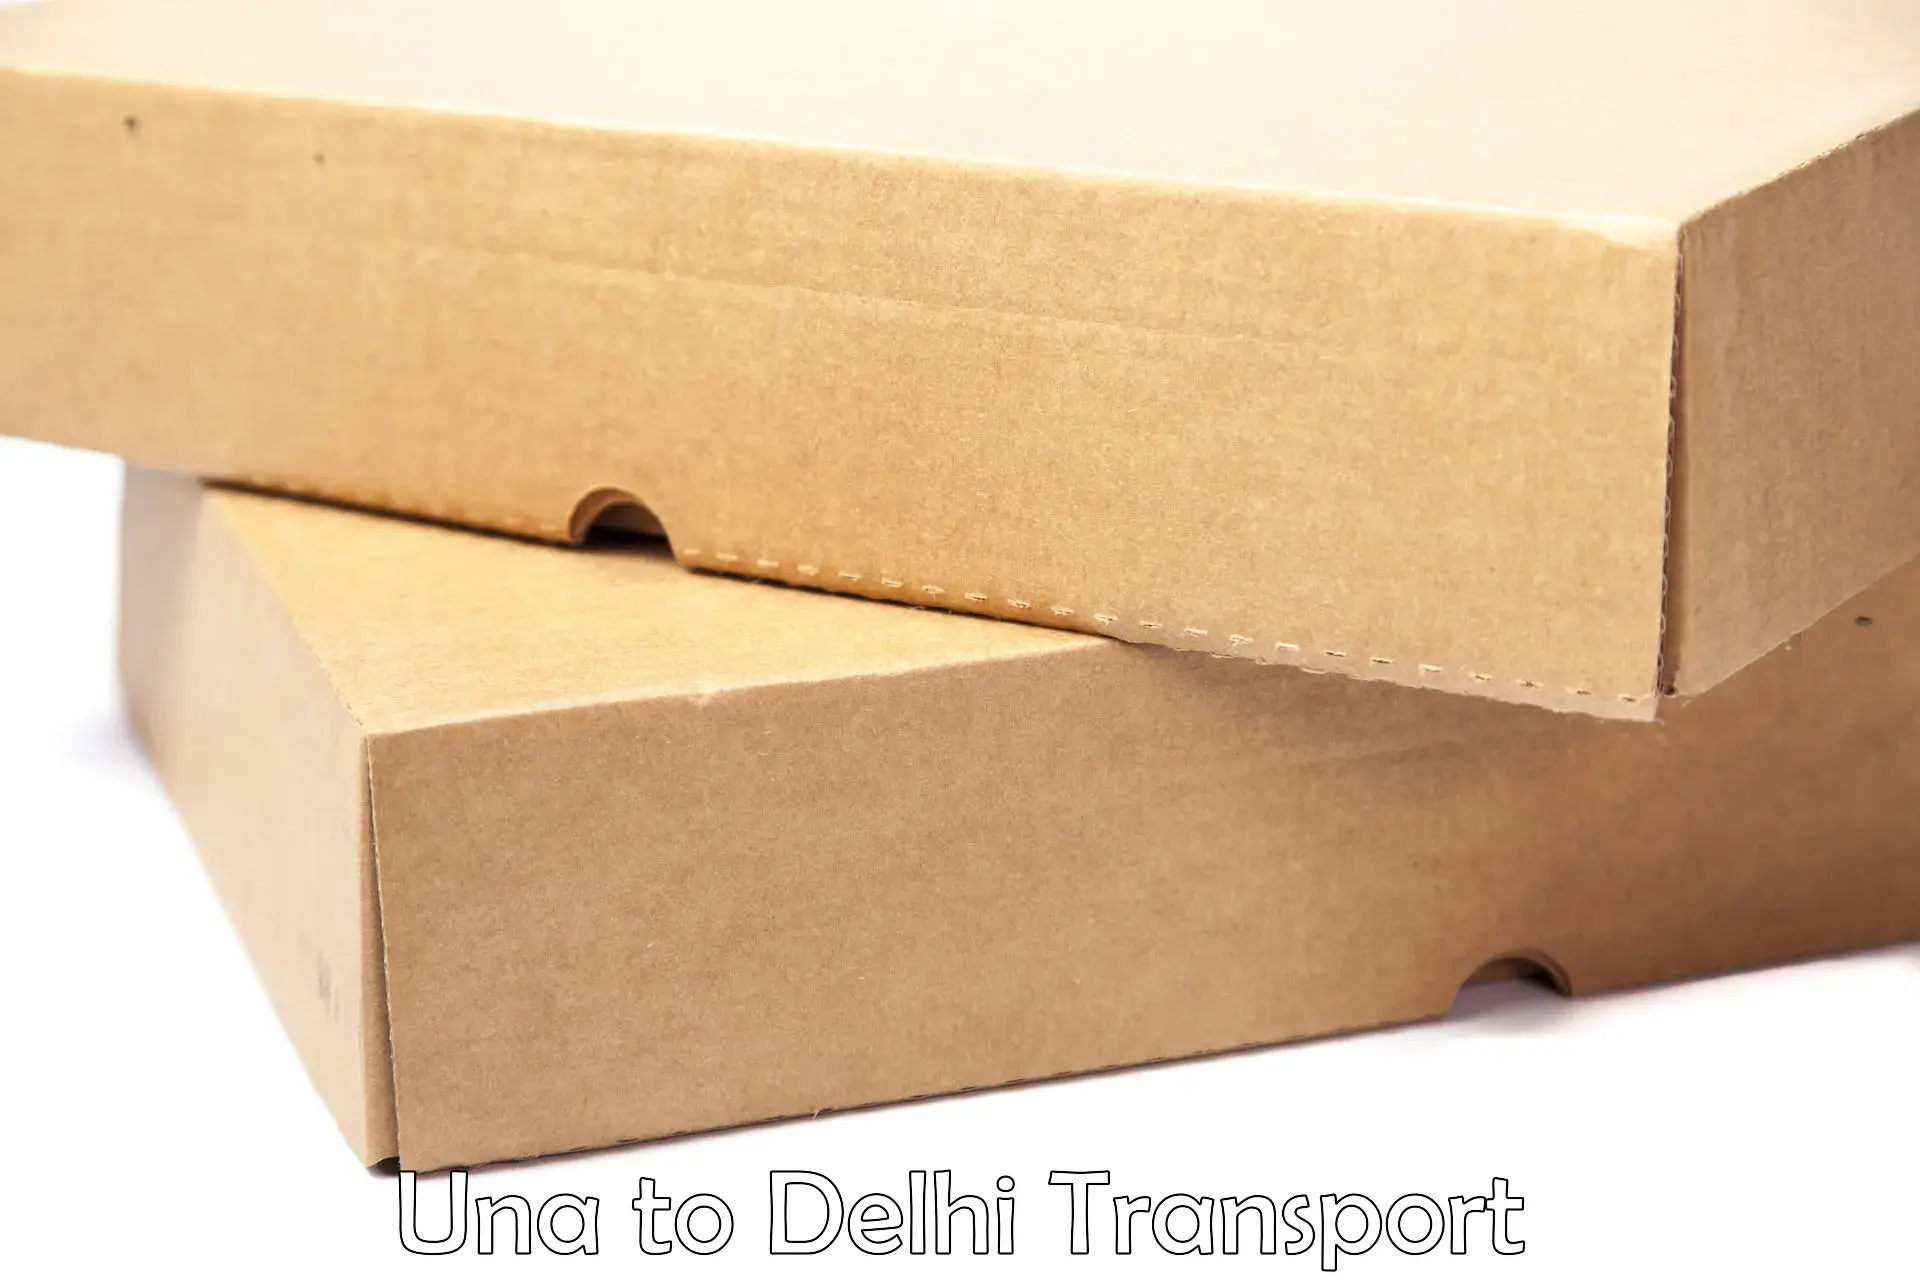 Cycle transportation service Una to Lodhi Road